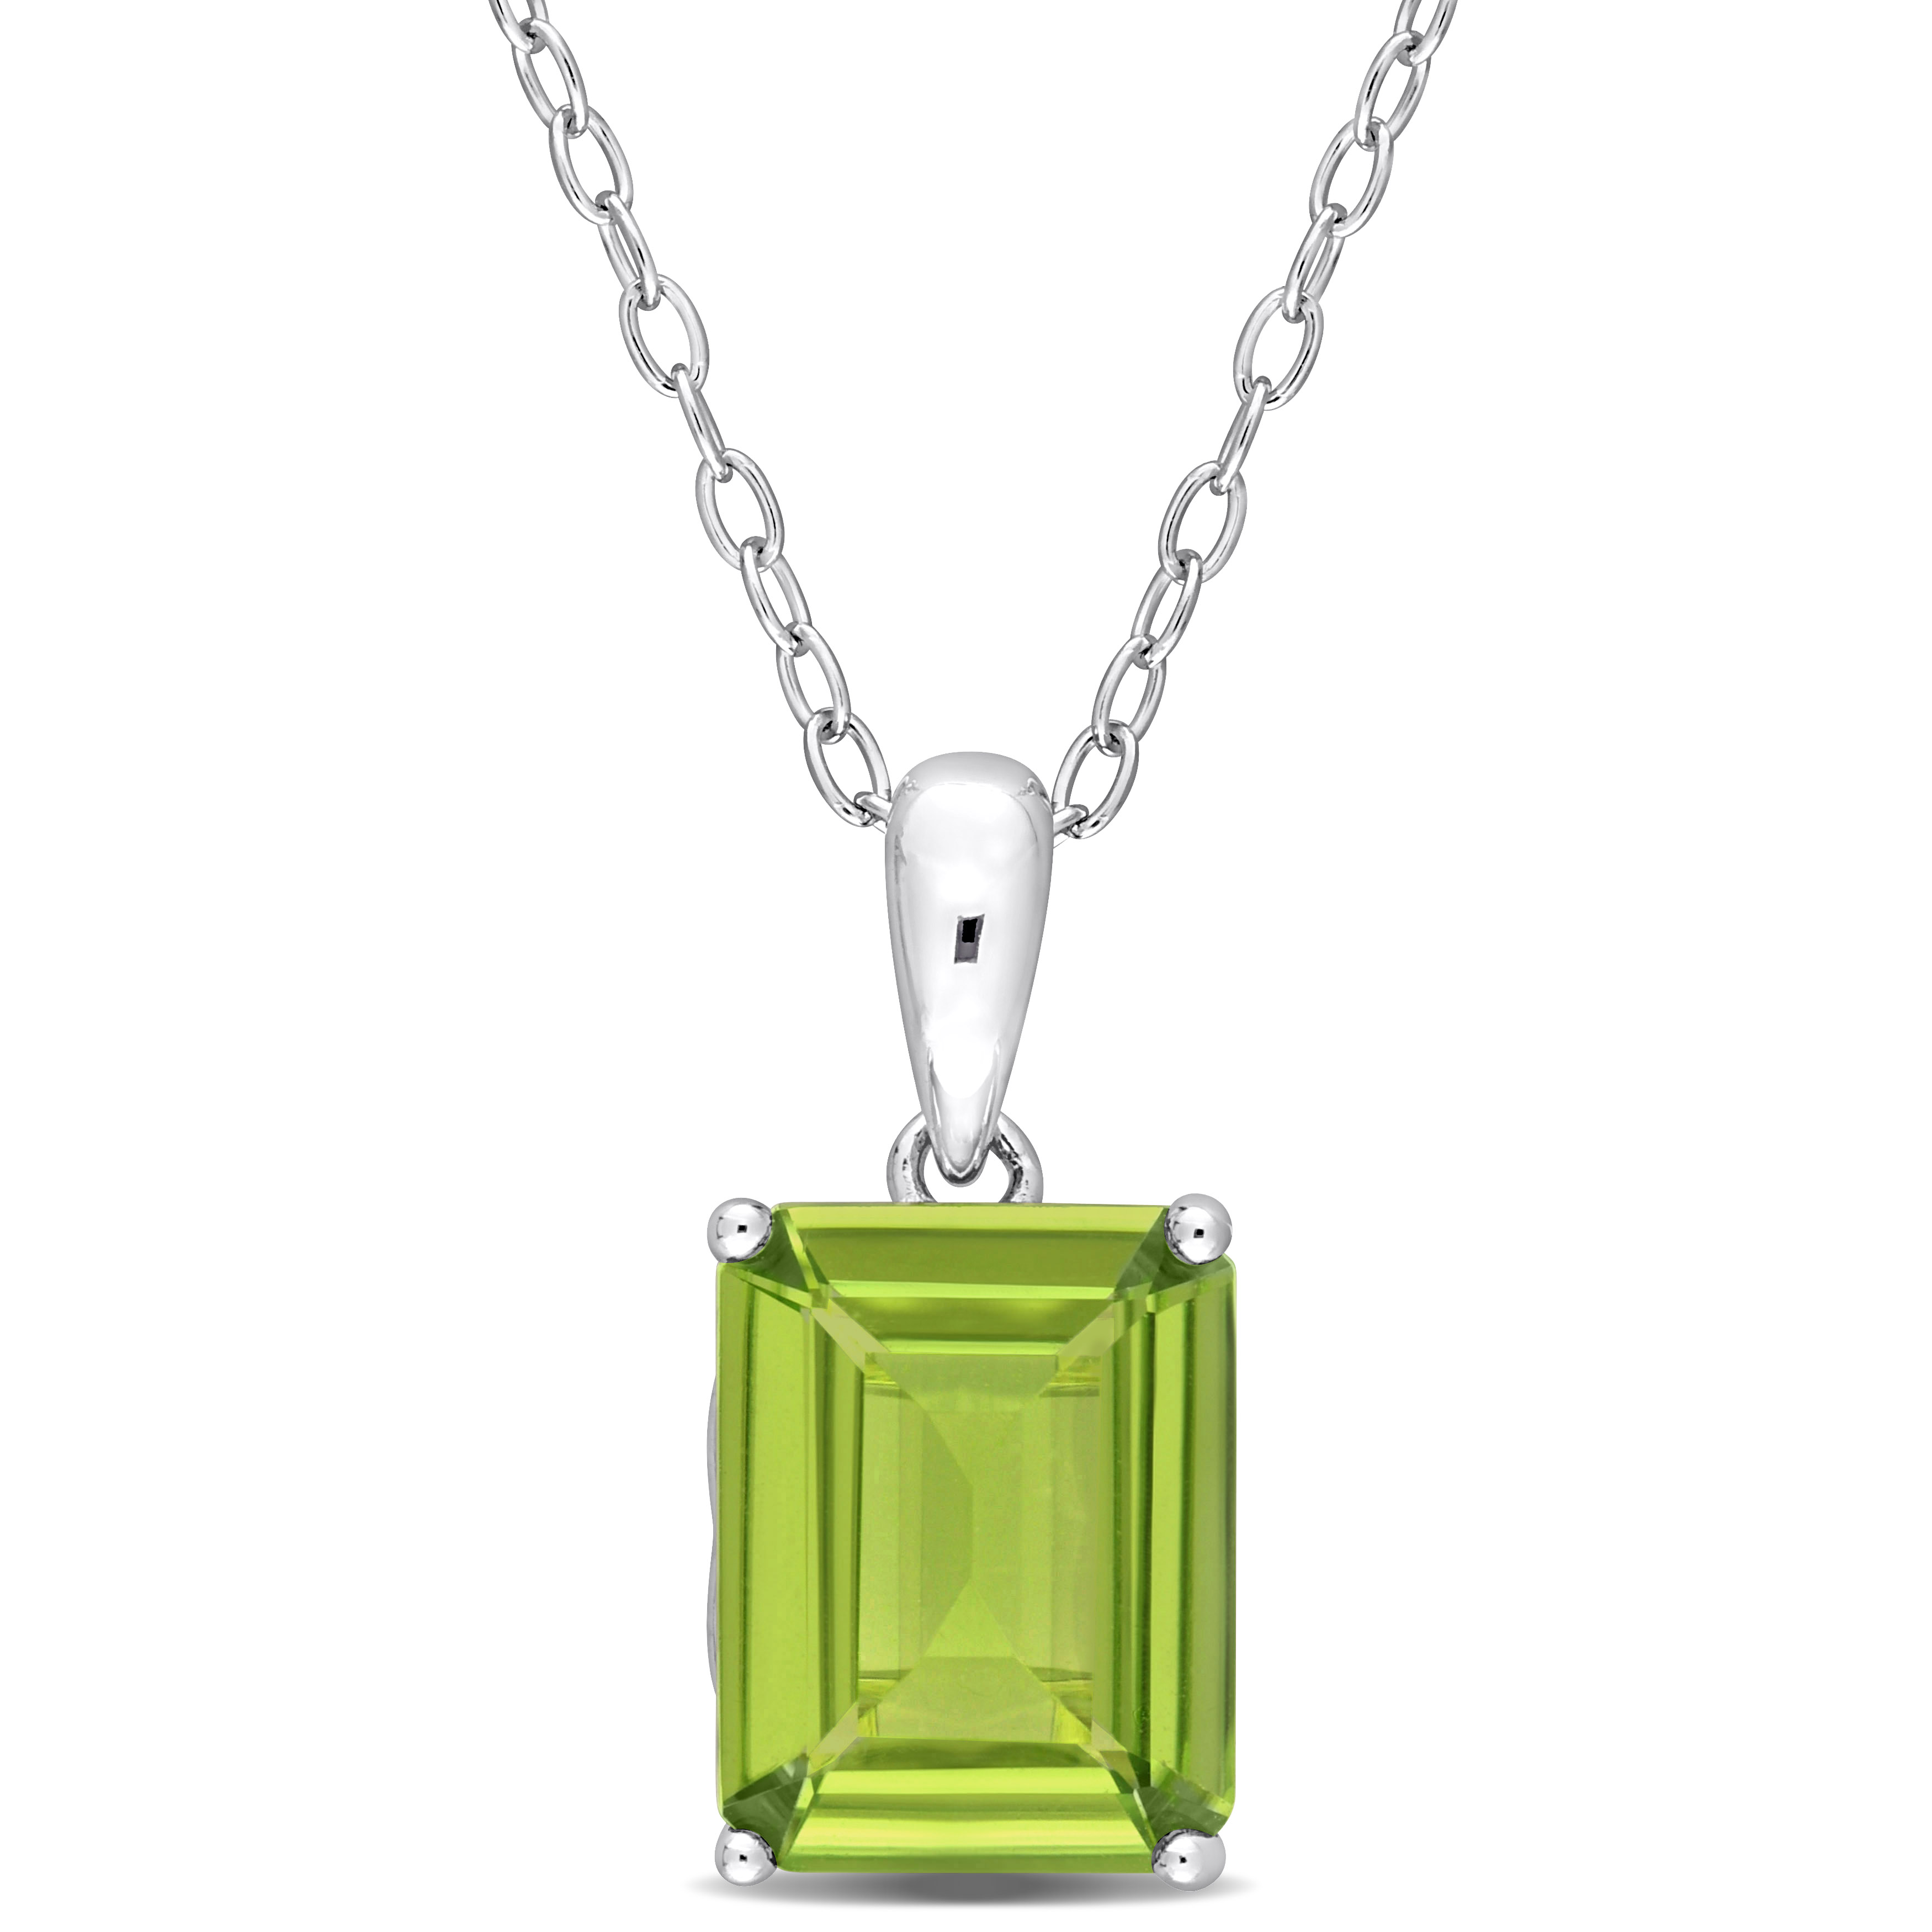 2 3/8 CT TGW Emerald Cut Peridot Solitaire Heart Design Pendant with Chain in Sterling Silver - 18 in.